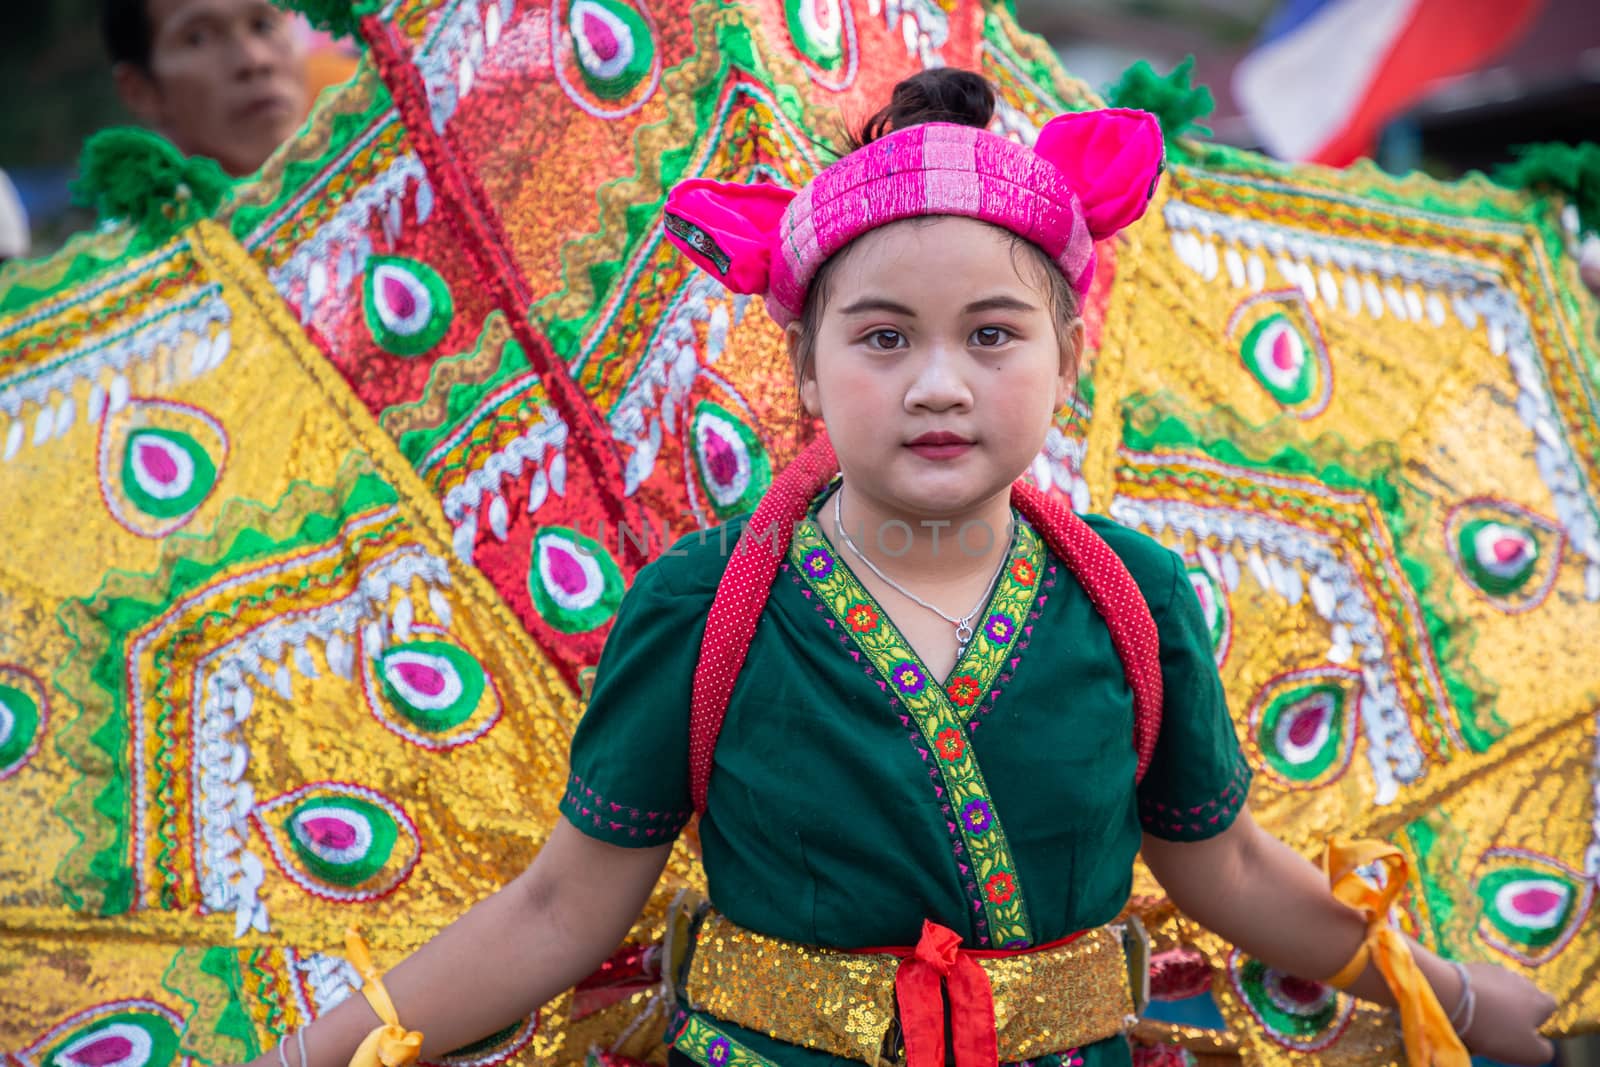 Cute girl of Shan or Tai Yai (ethnic group living in parts of Myanmar and Thailand) in tribal dress on Shan New Year celebrations. by phanthit